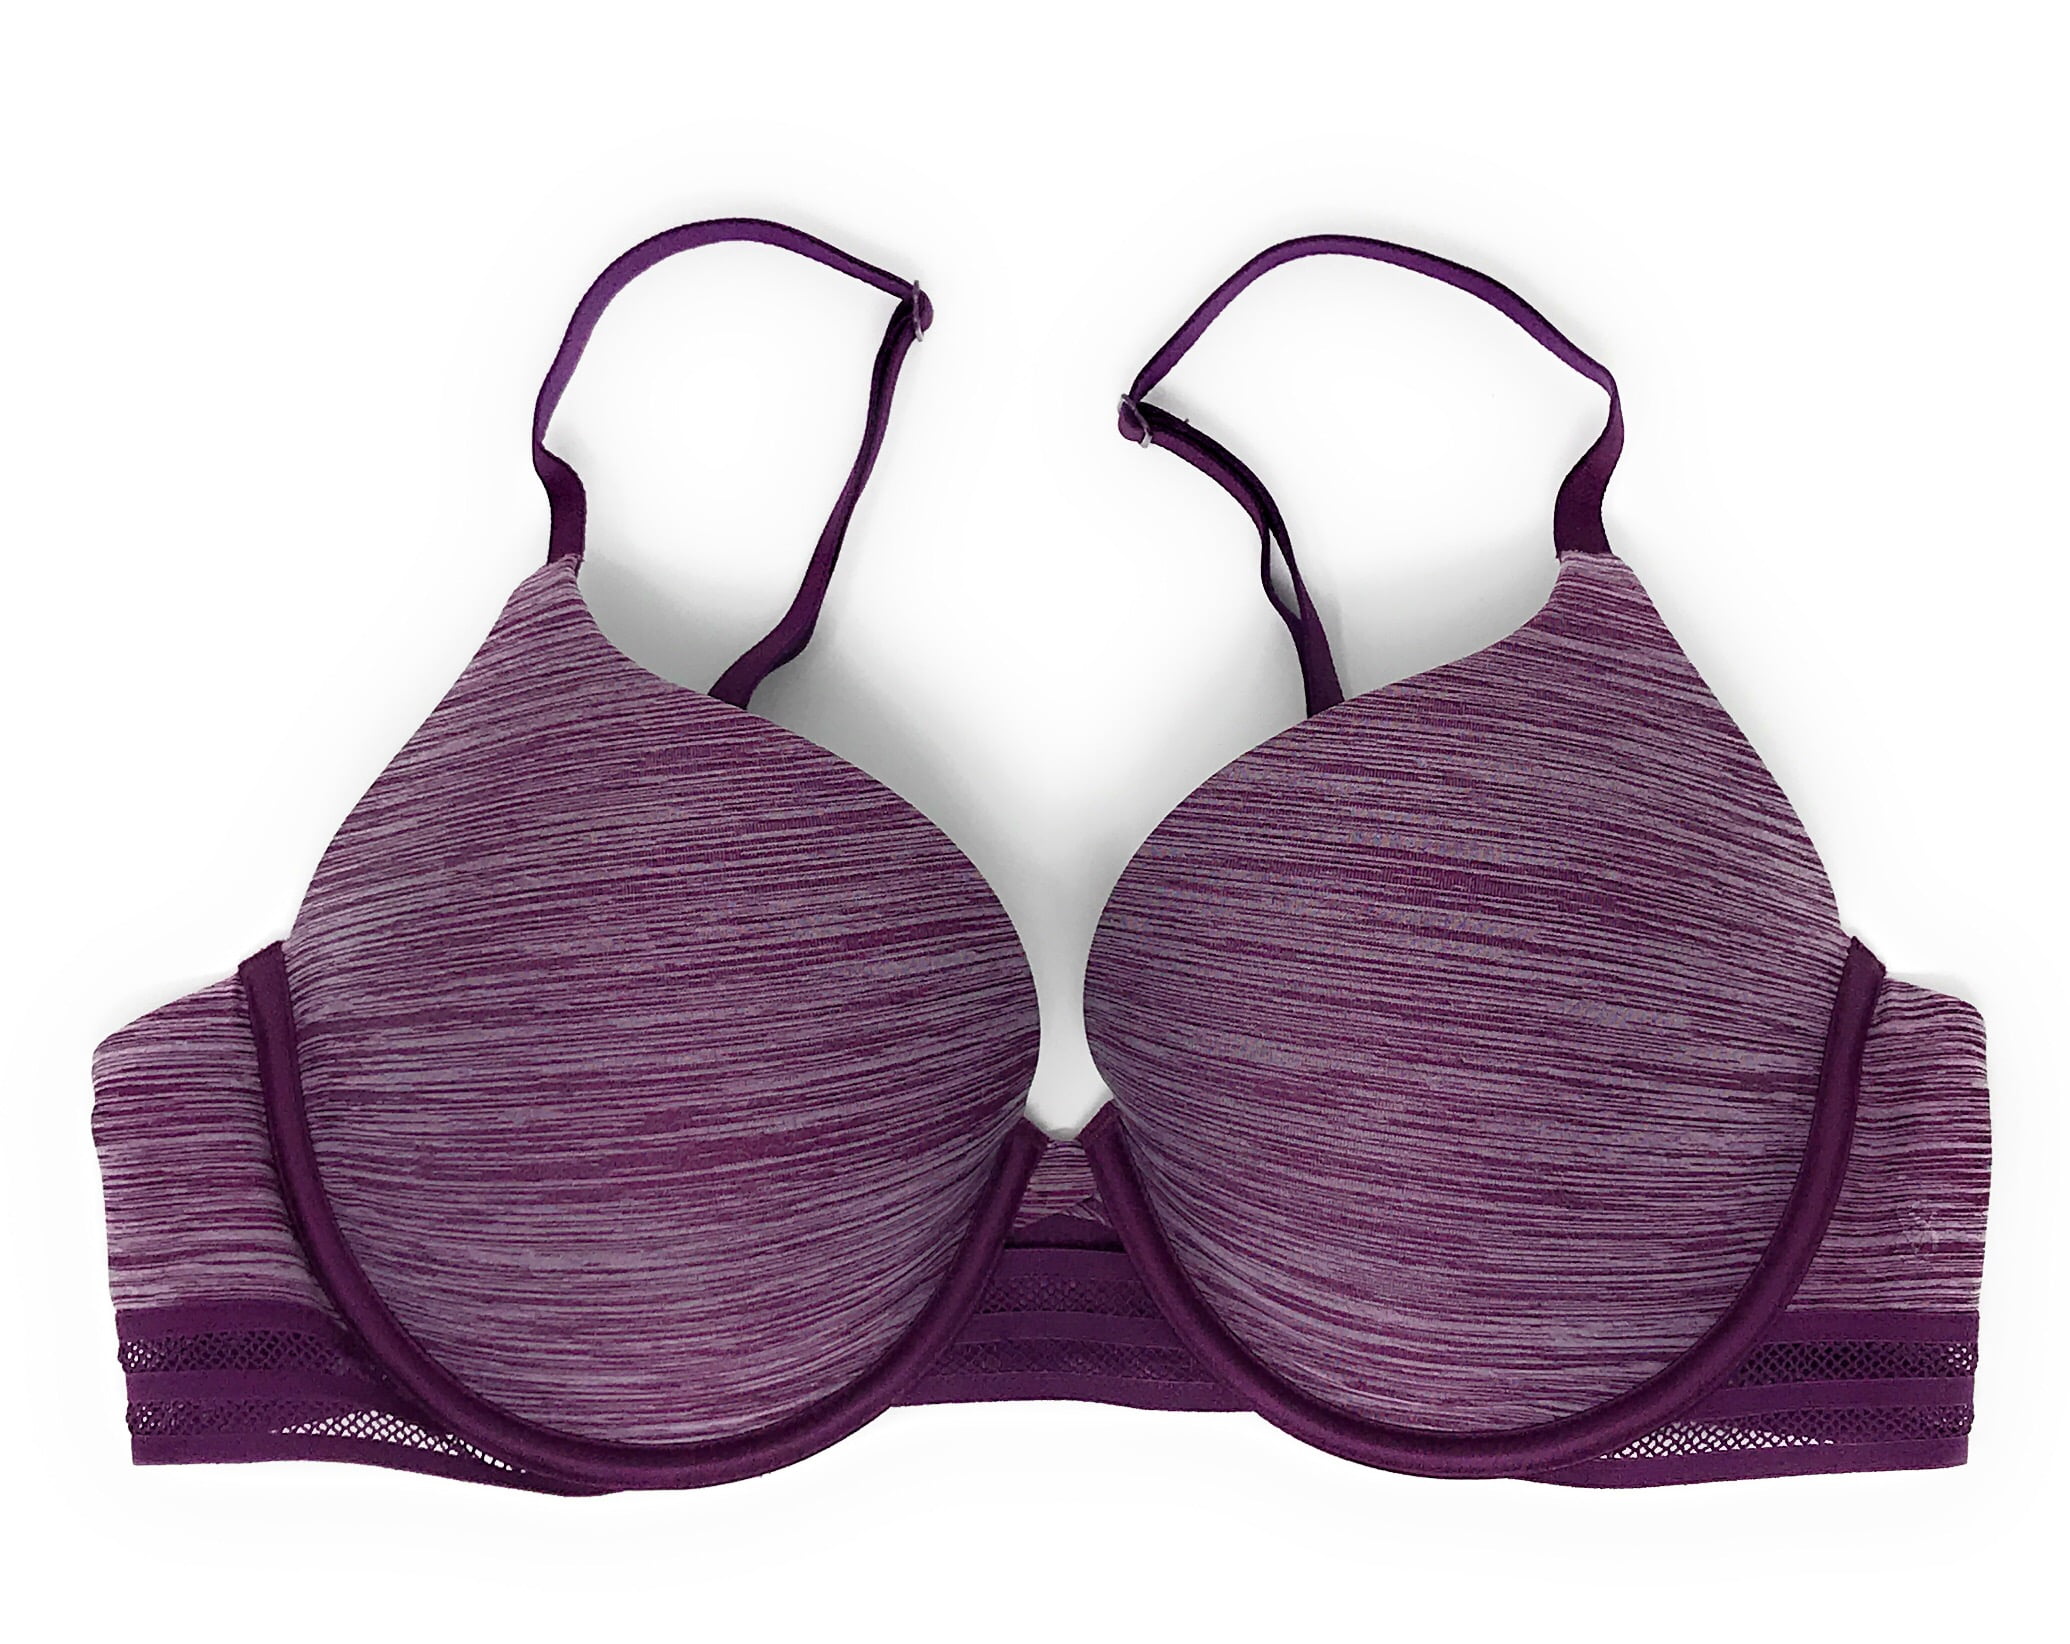 Victoria's Secret Women's 34D Purple Lined Full Coverage Bra Size 34 D -  $25 - From Tanya